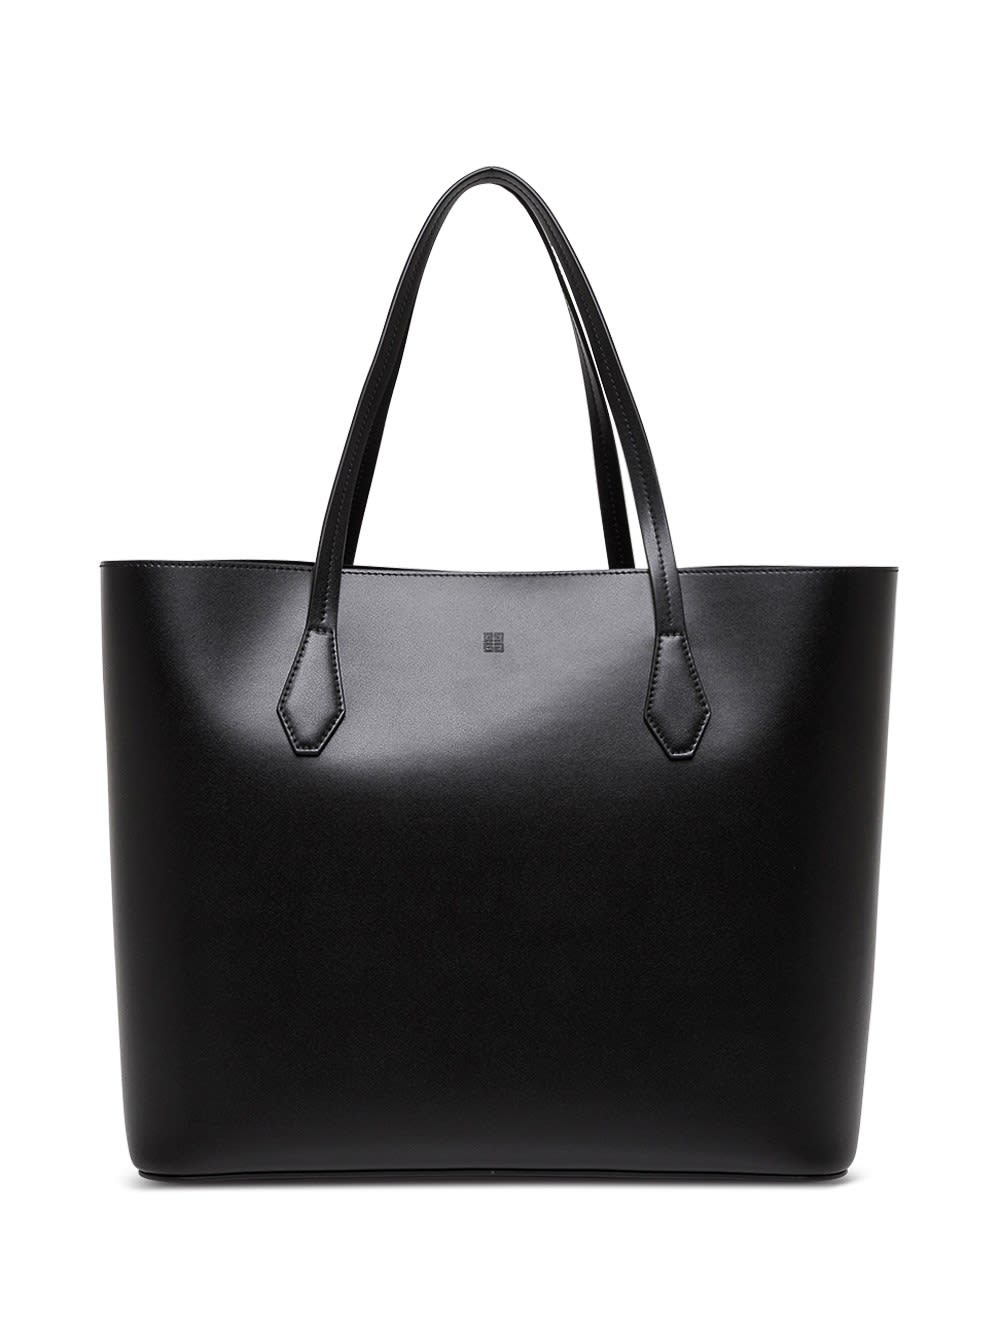 GIVENCHY WING SHOPPER IN BLACK SMOOTH LEATHER,BB50HBB13M001